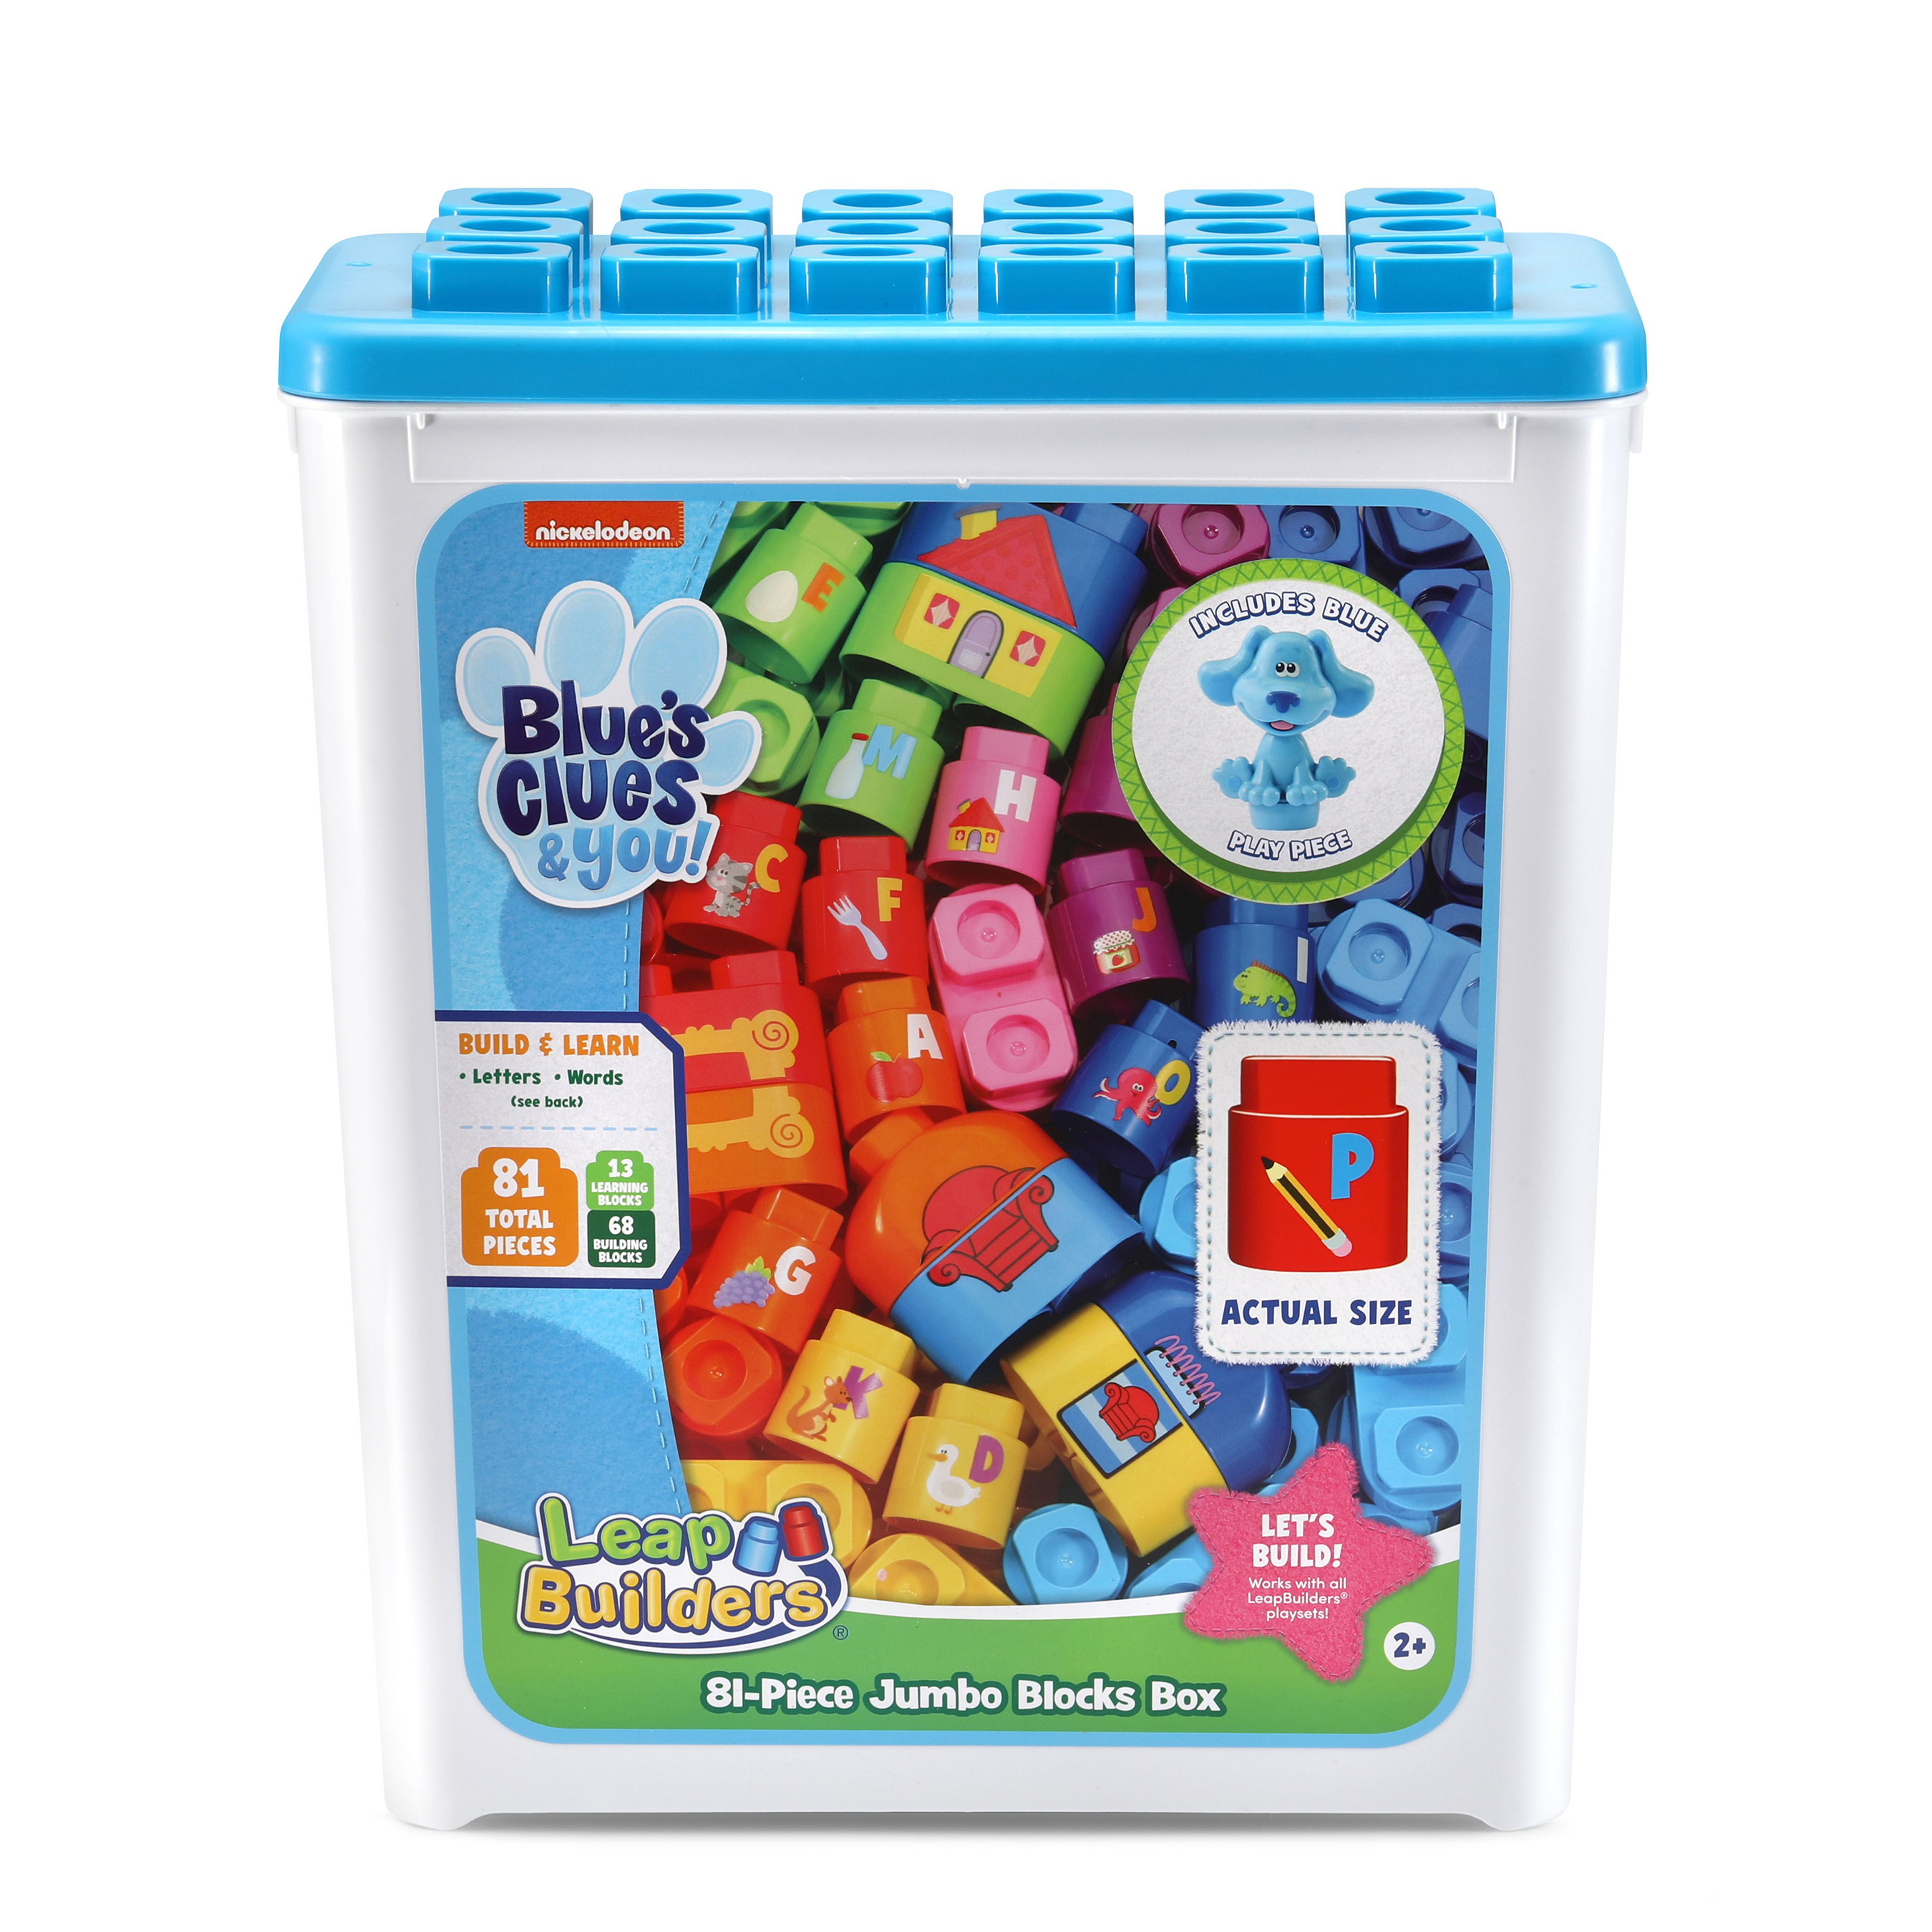 Drastisch Wetland fluit New Blue's Clues & You!™ Toys from LeapFrog® Available Now